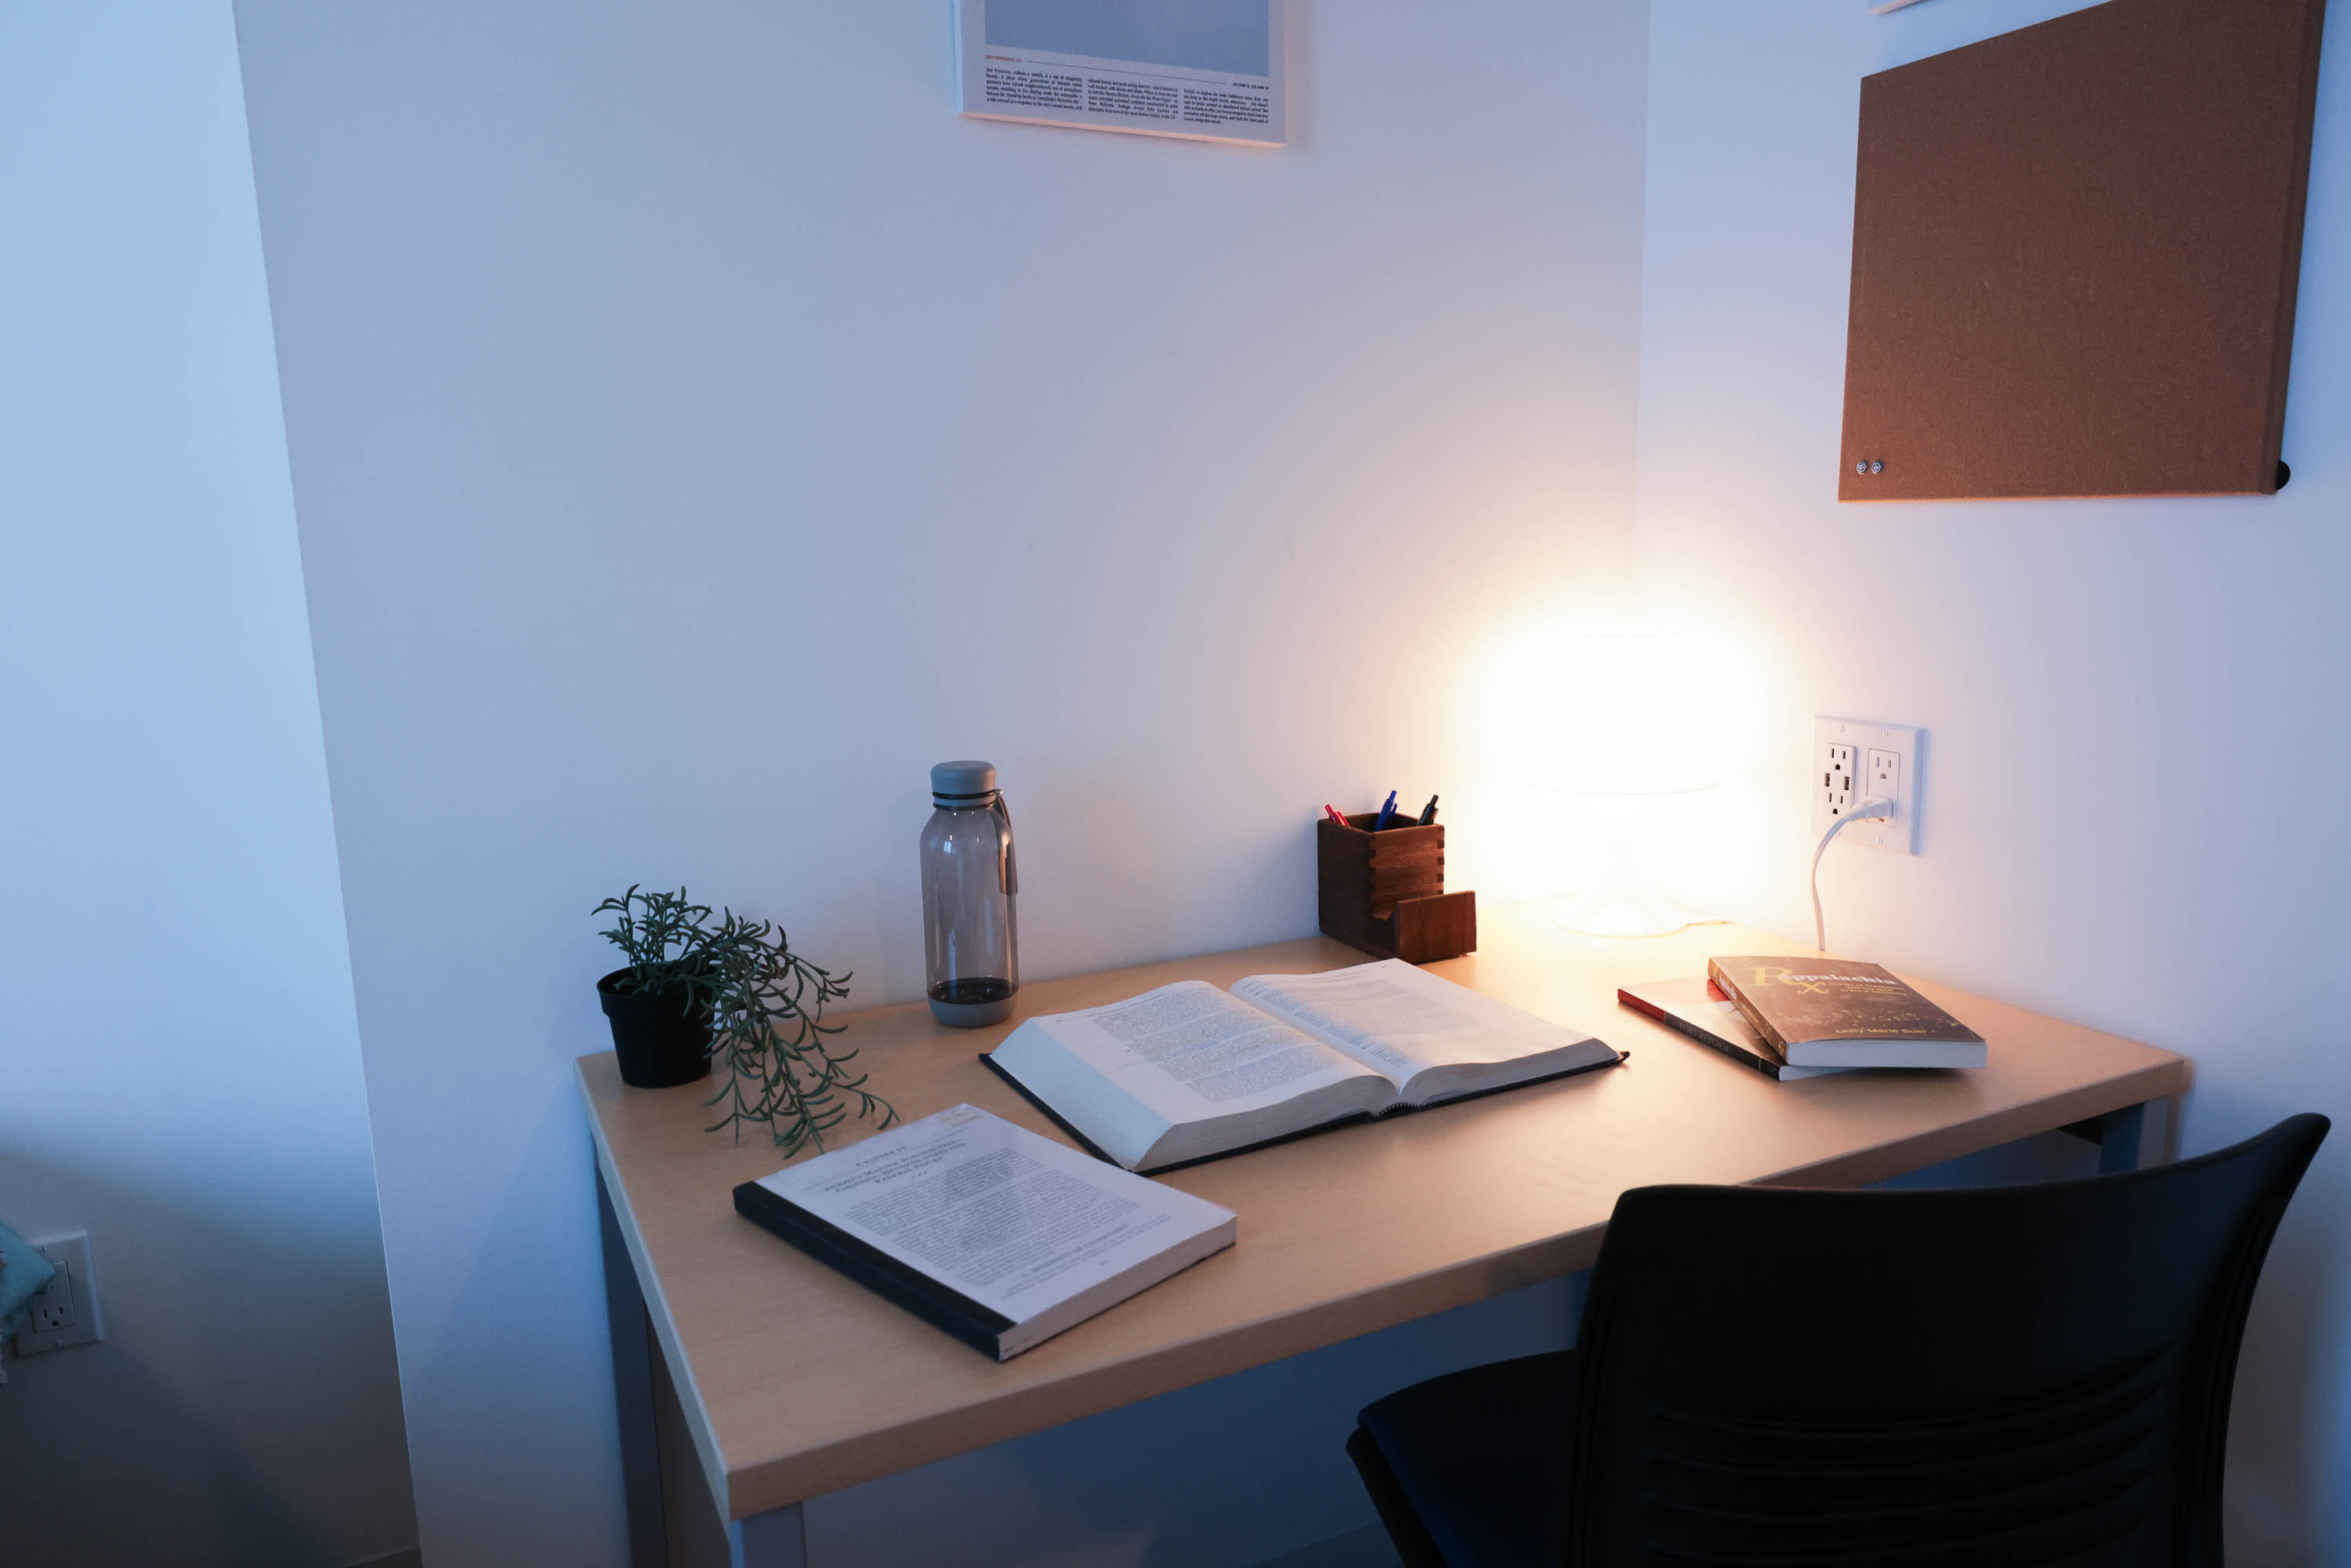 A tidy study desk with a lamp, books, a plant, a bottle, and a pen holder.